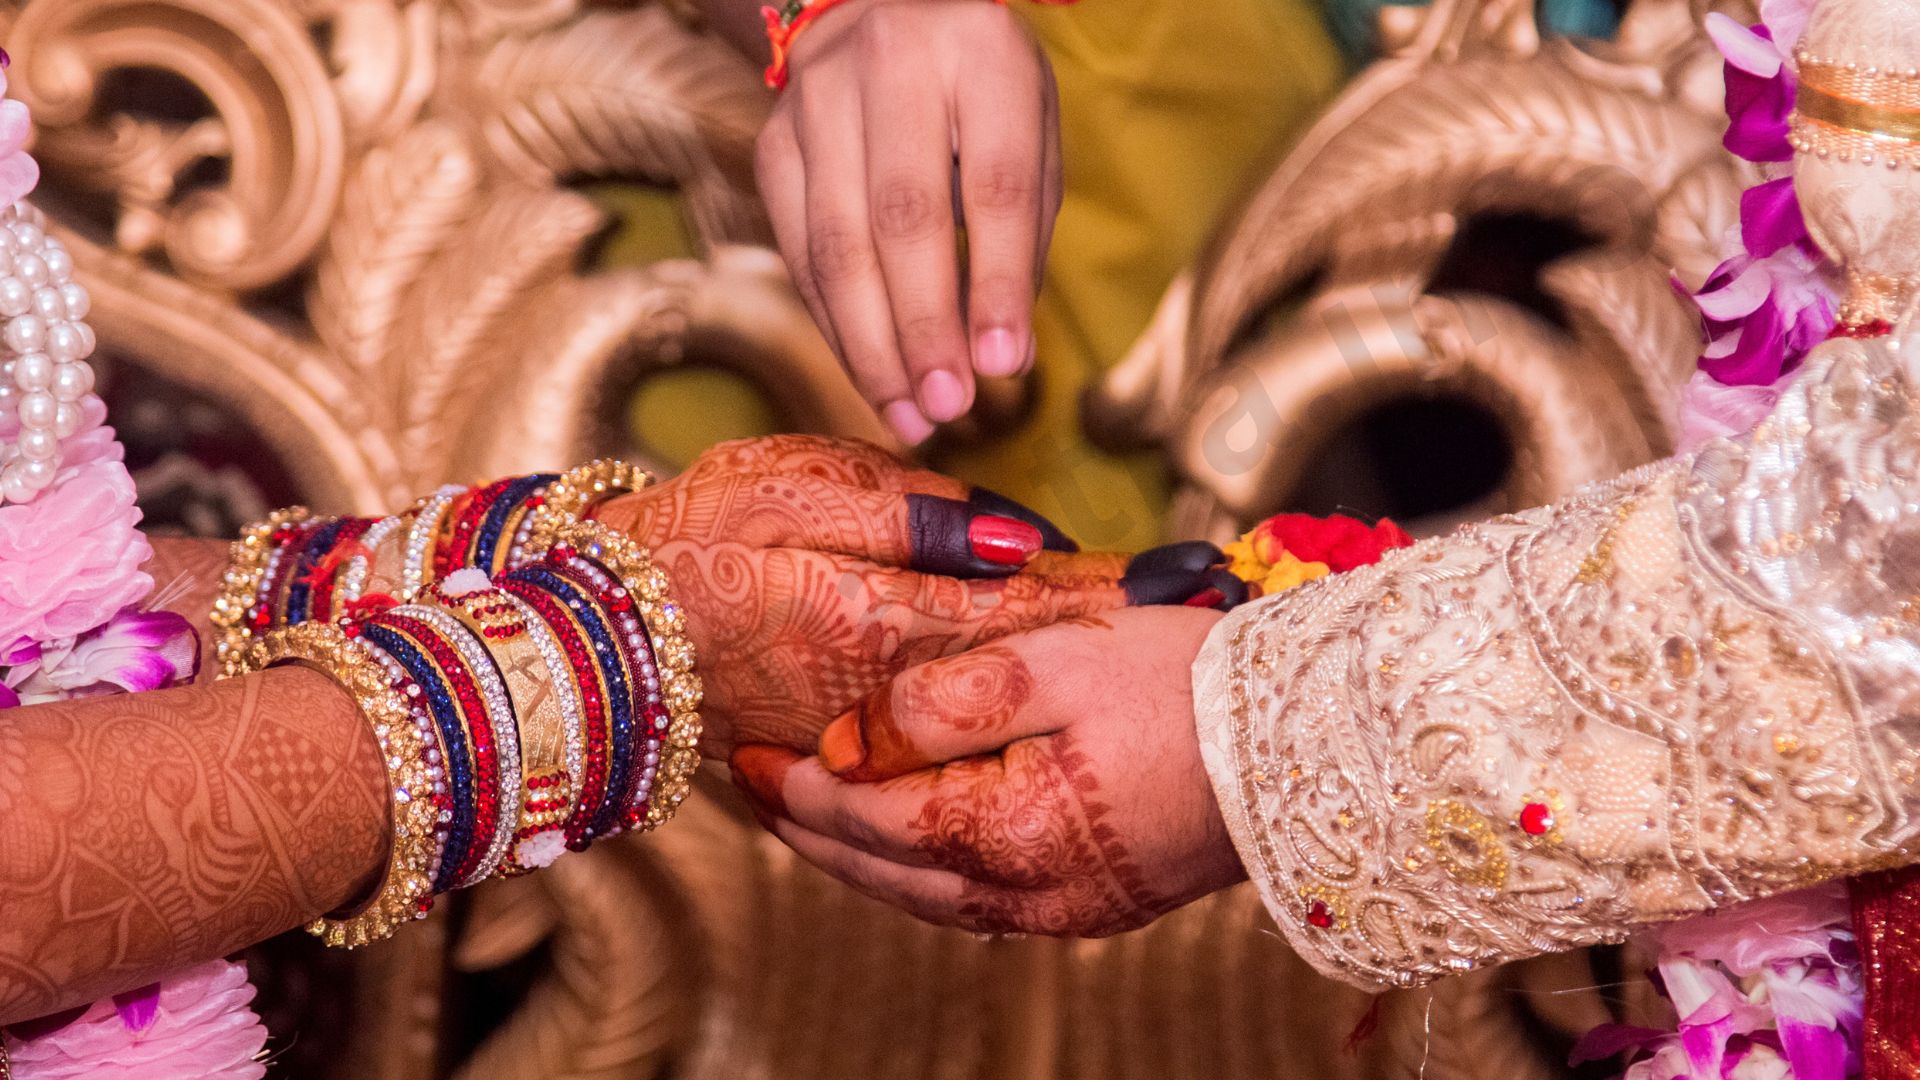 Meaning of Saat Phere in Hindu Marriages: Seven steps of LIFE!